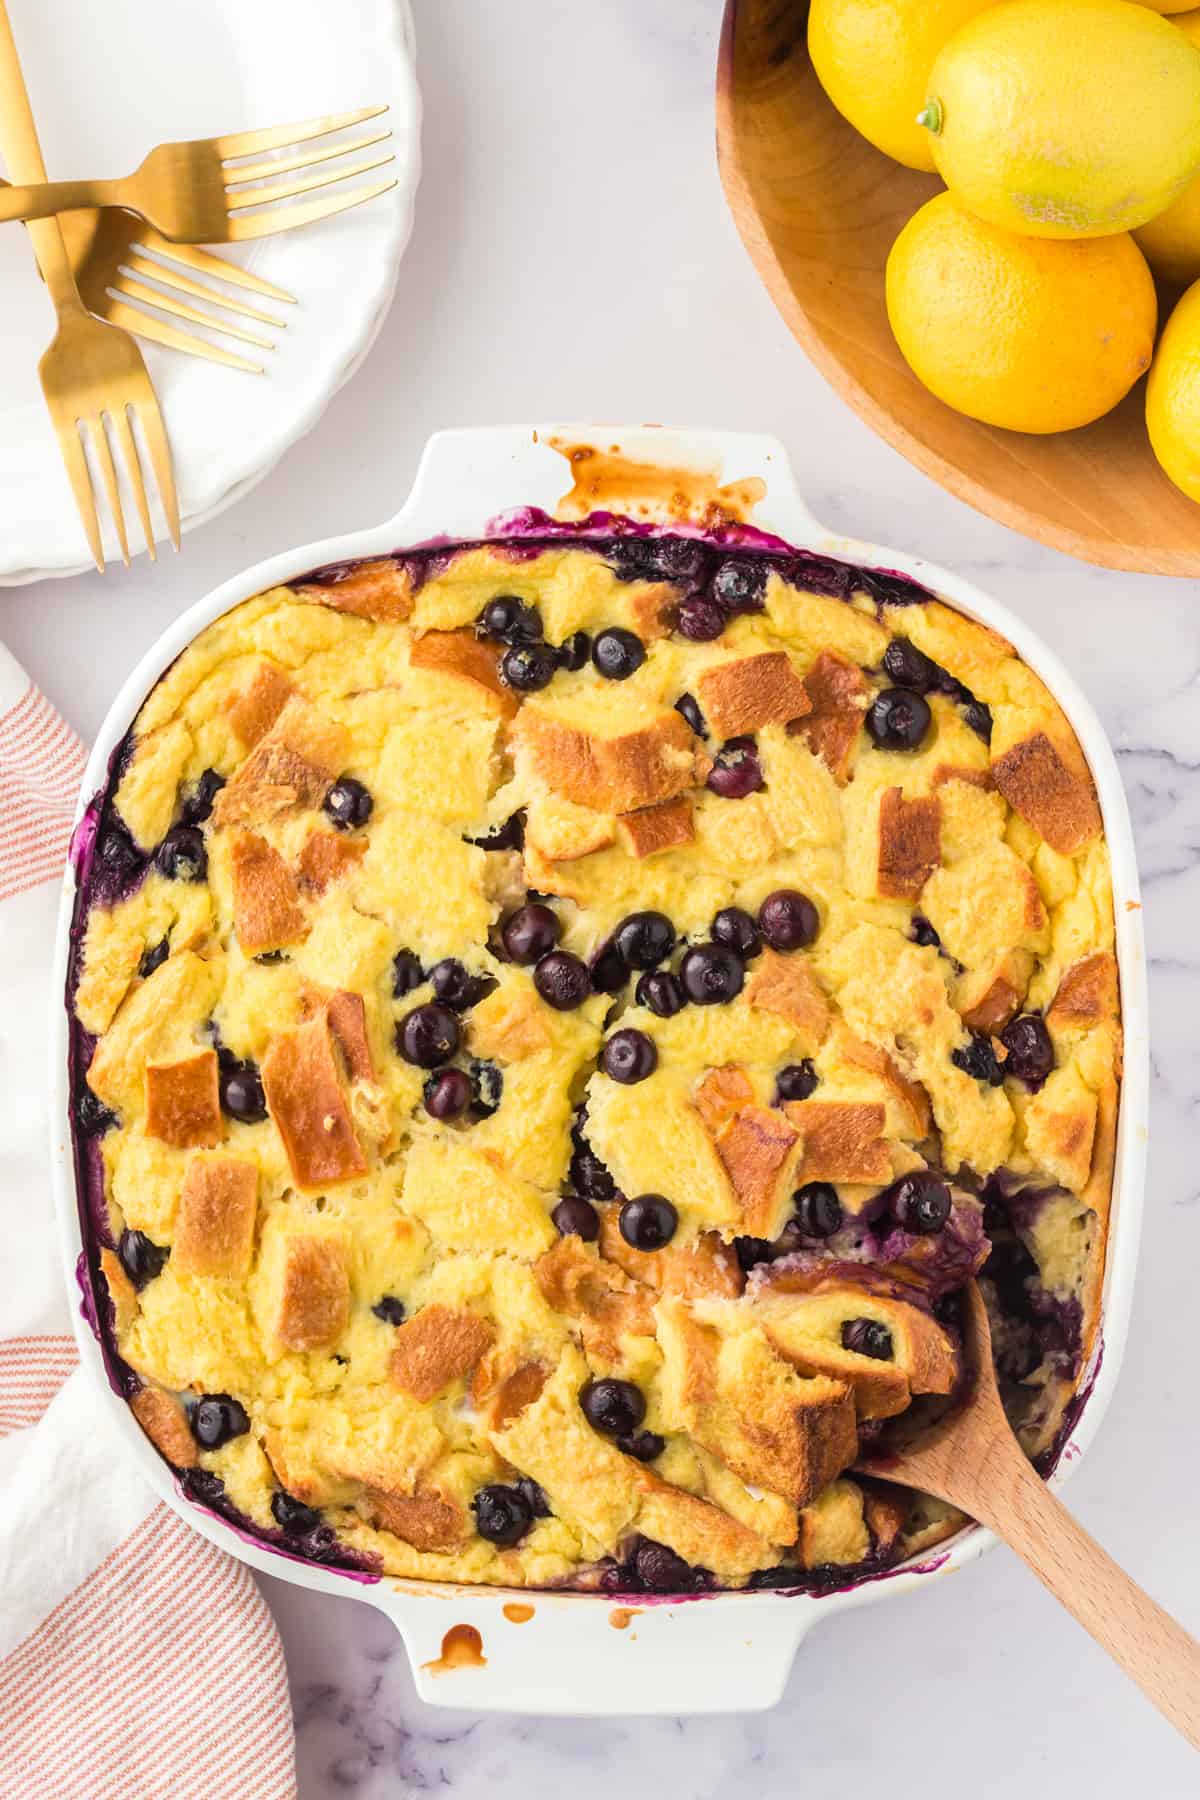 Lemon blueberry bread pudding in an square baking dish with wooden spoon sticking out of the corner.